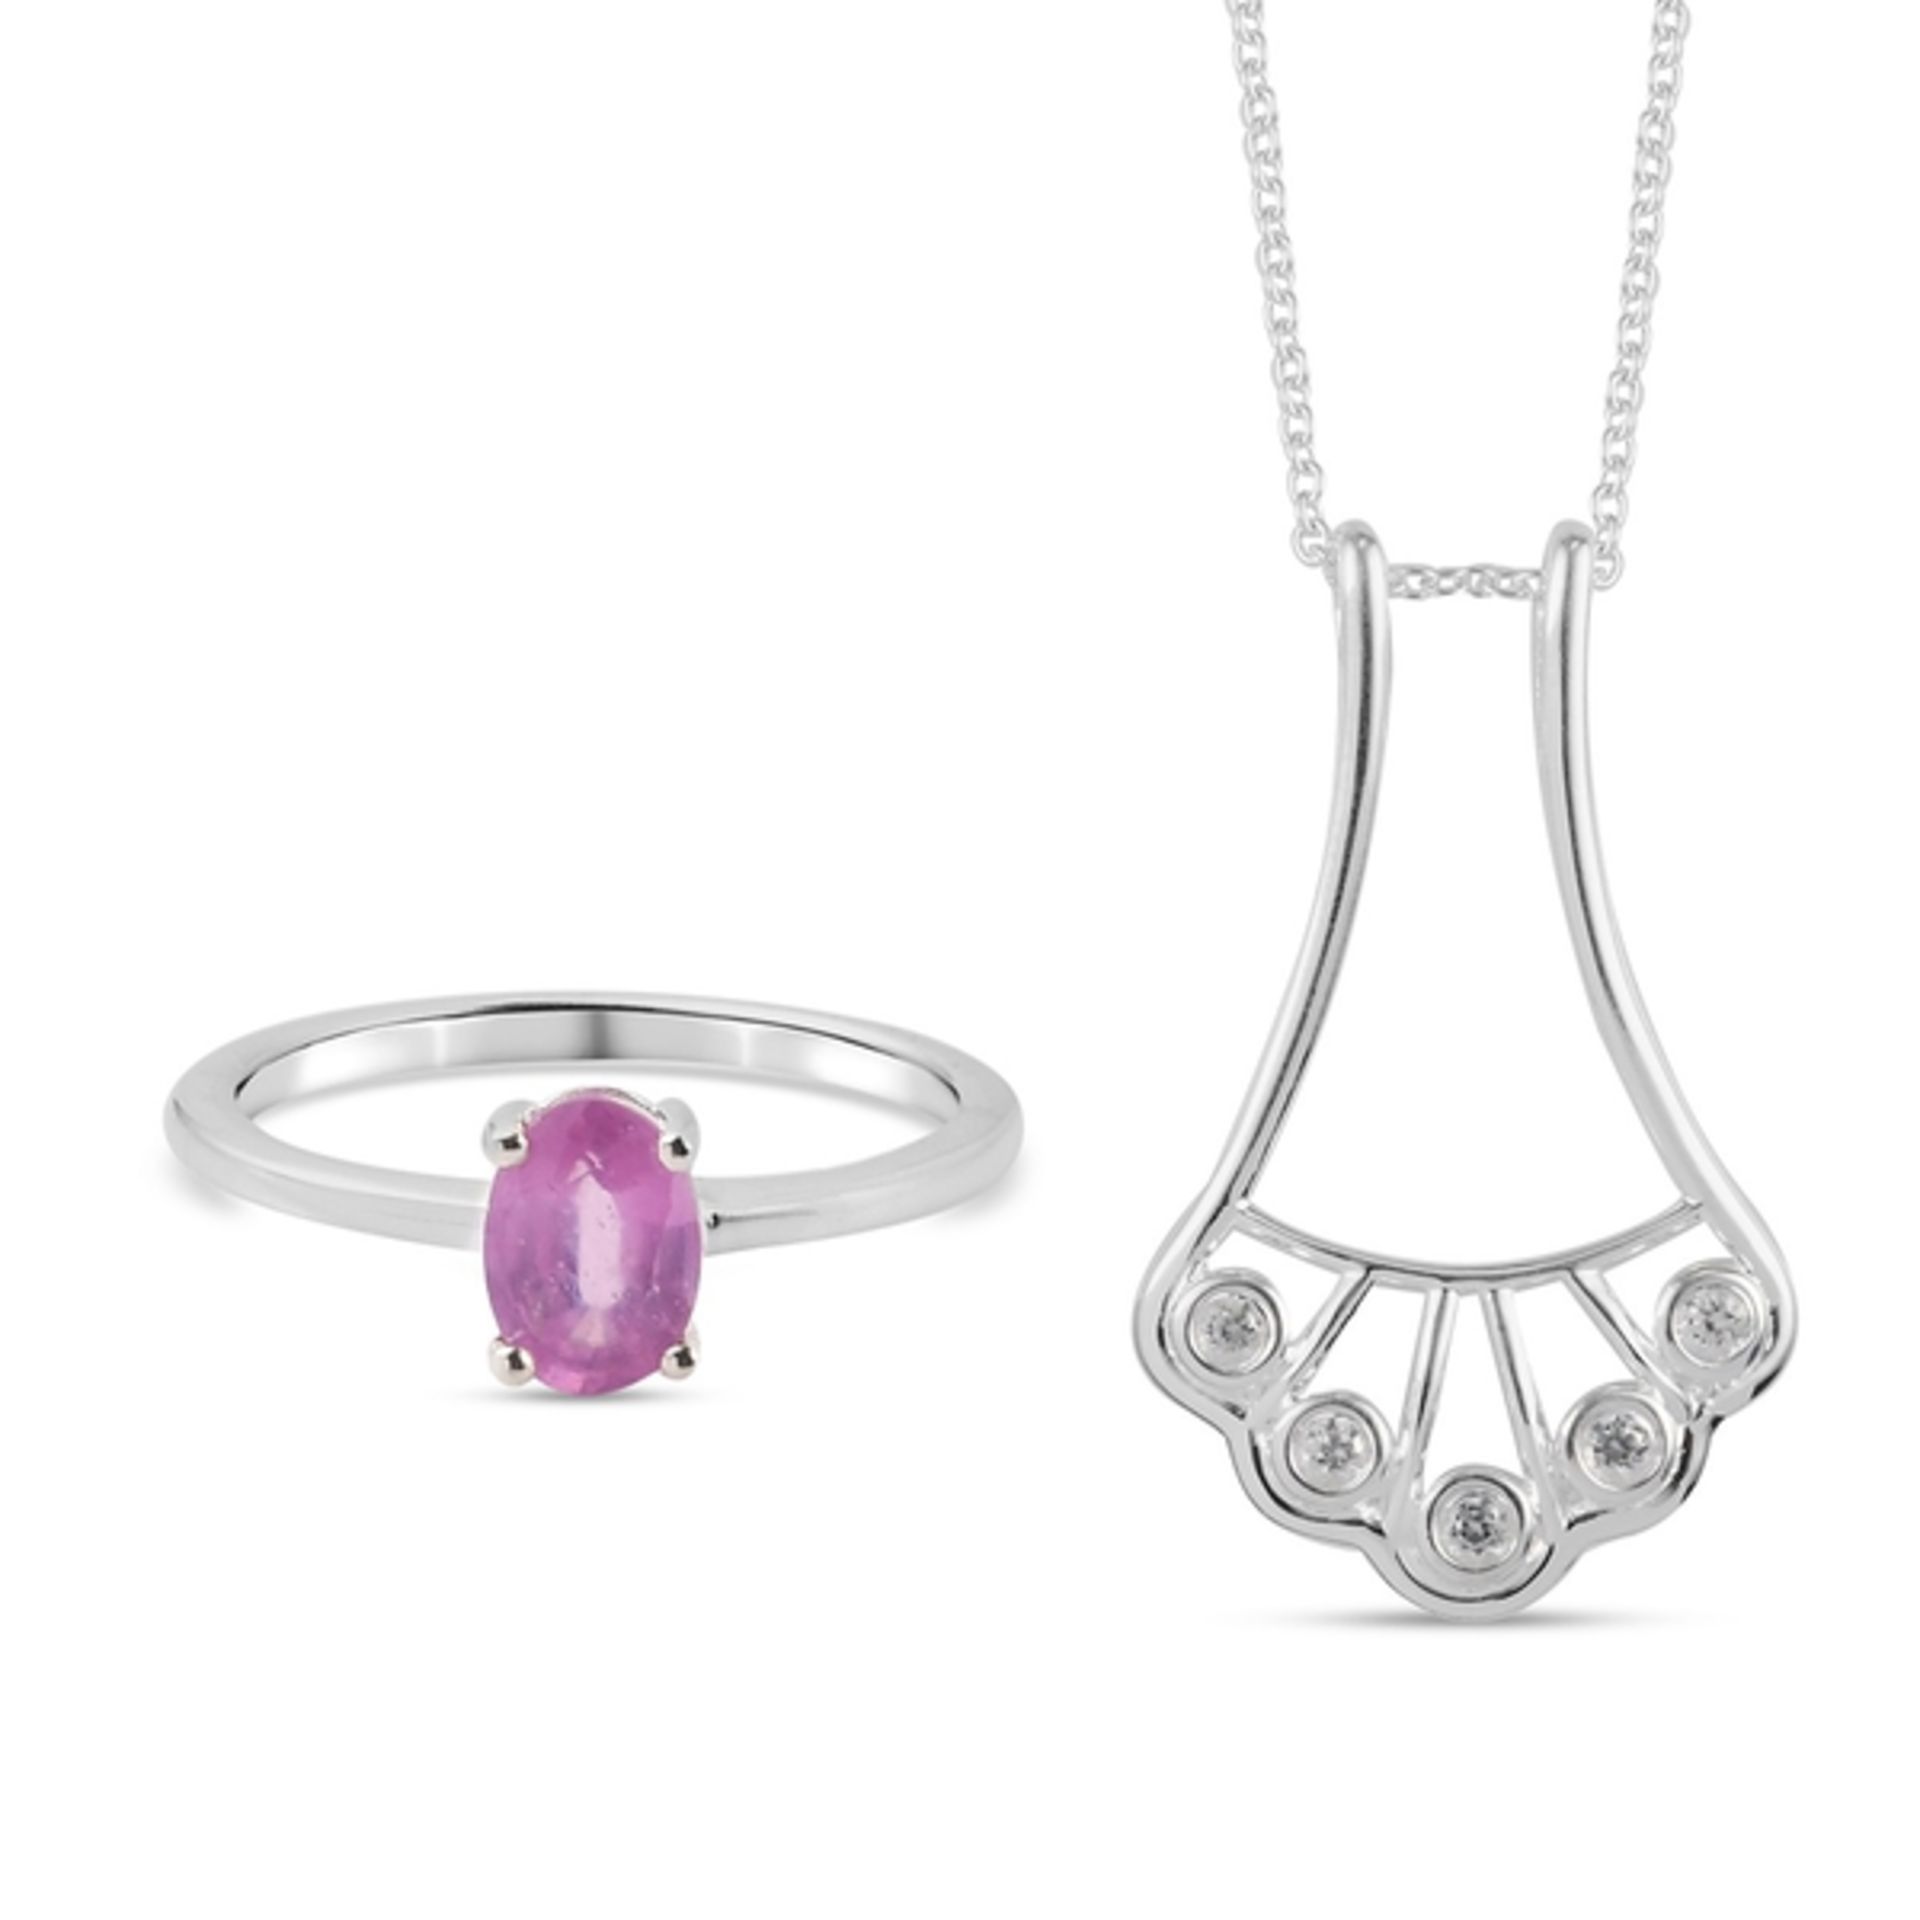 NEW!! 2 Piece Set - Pink Sapphire and Natural Cambodian Zircon Ring and Pendant - Image 2 of 5